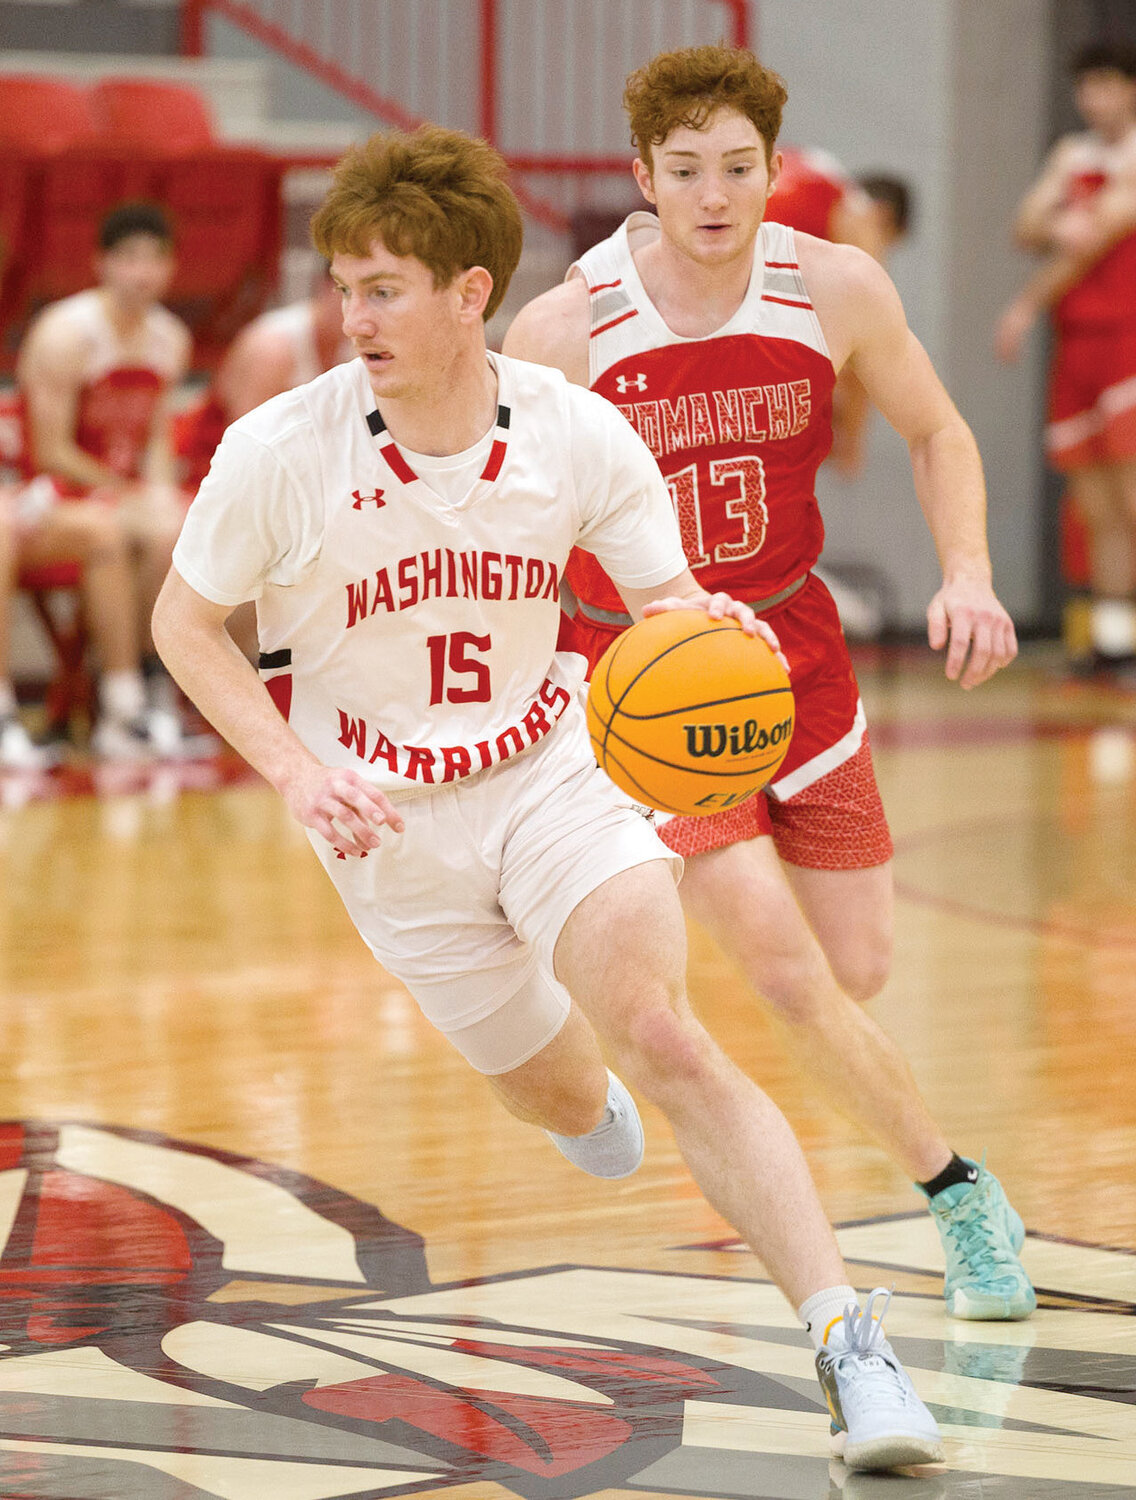 Washington senior Noah Ladlee dribbles in front of the defense during the Warriors’ 54-22 win over Comanche Saturday. Ladlee scored seven points in the game.